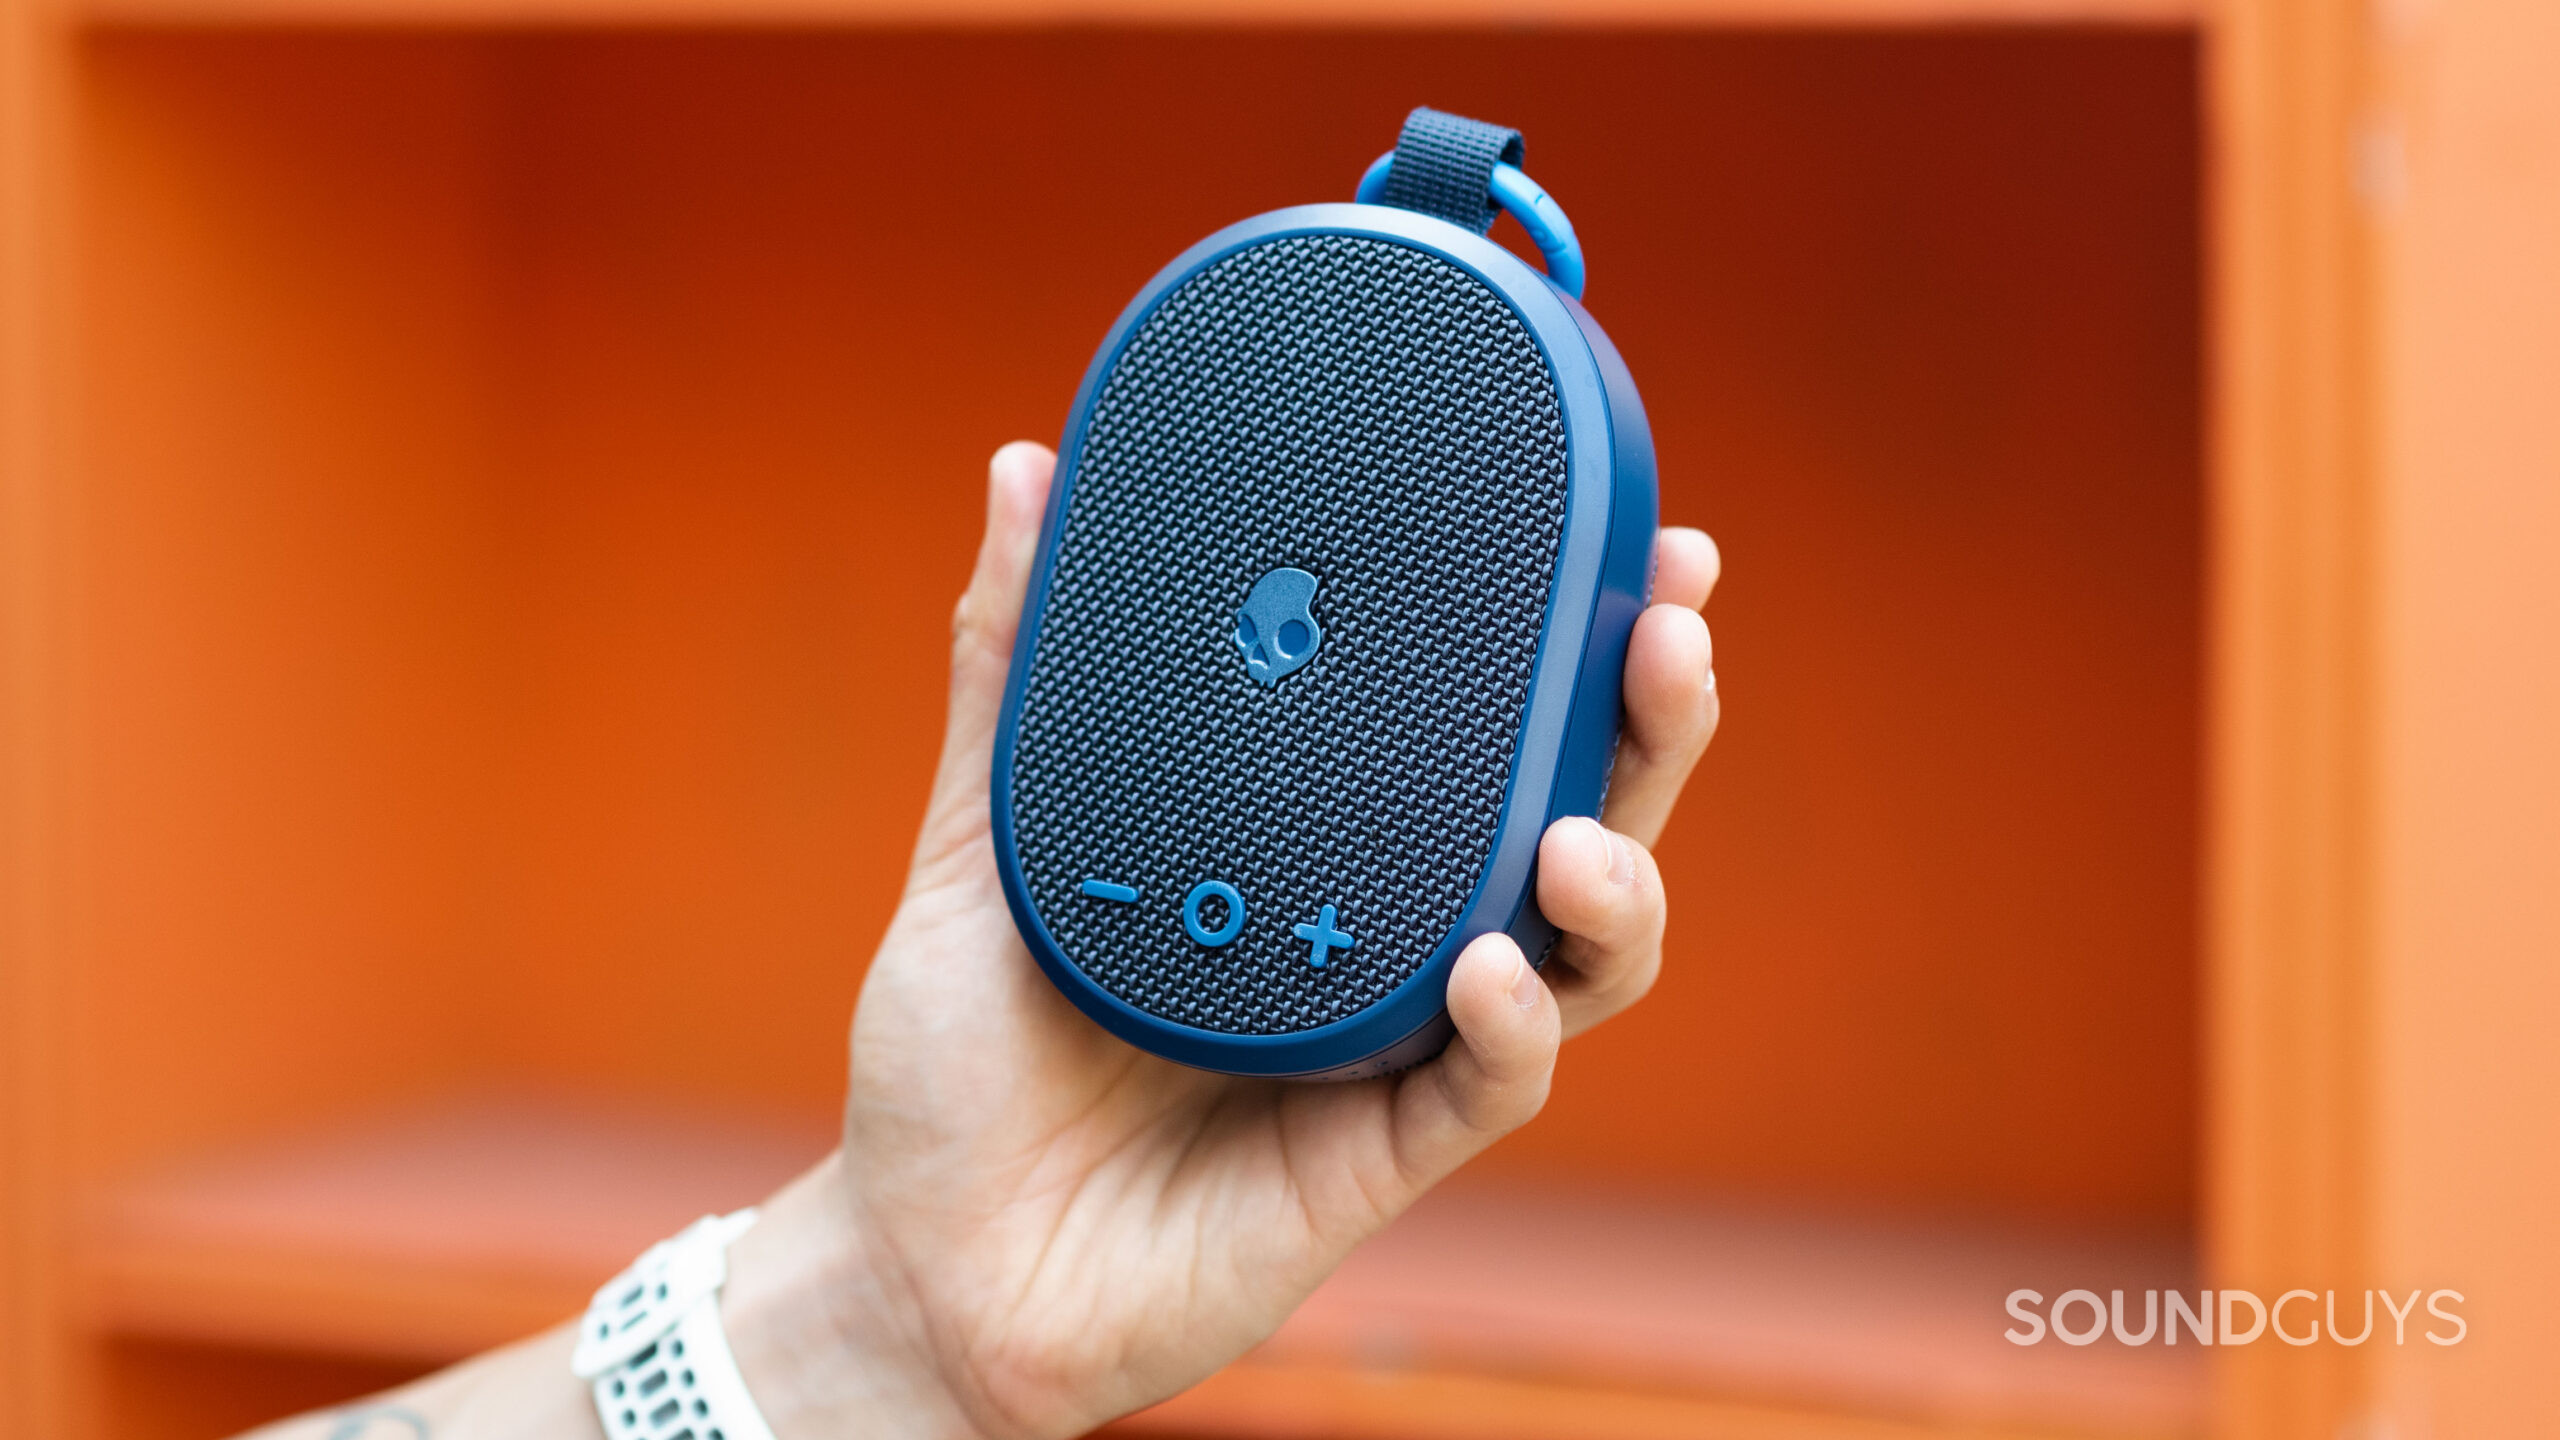 Bem Wireless Outlet speaker review: Bluetooth audio that's truly plug and  play (hands-on) - CNET